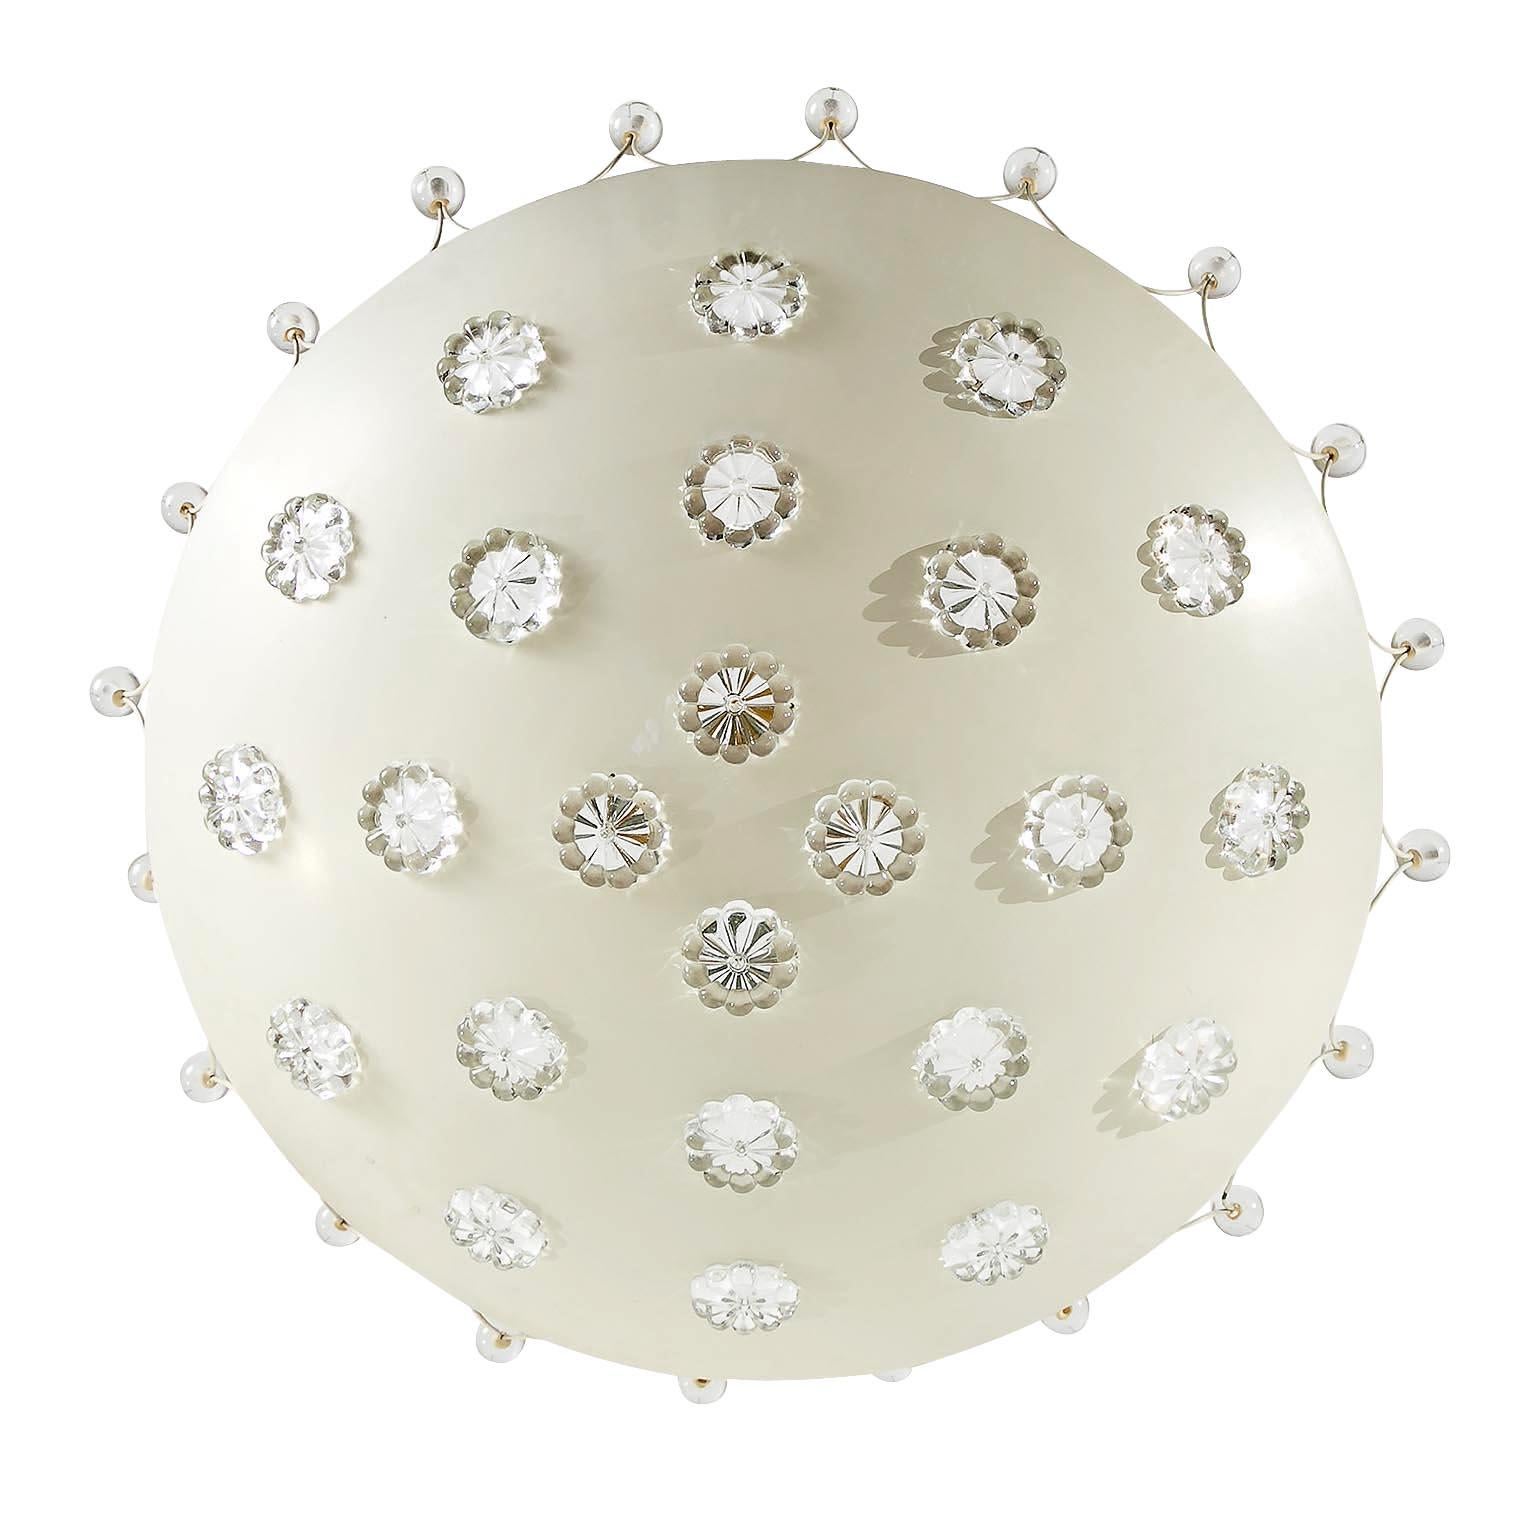 A beautiful uplight ceiling chandelier by Rupert Nikoll, Austria, Vienna, manutactured in Mid-Century, circa 1960 (late 1950s or early 1960s).
It is made of a white enameled dome-shaped metal base with glass blossoms and glass beads.
The fixture